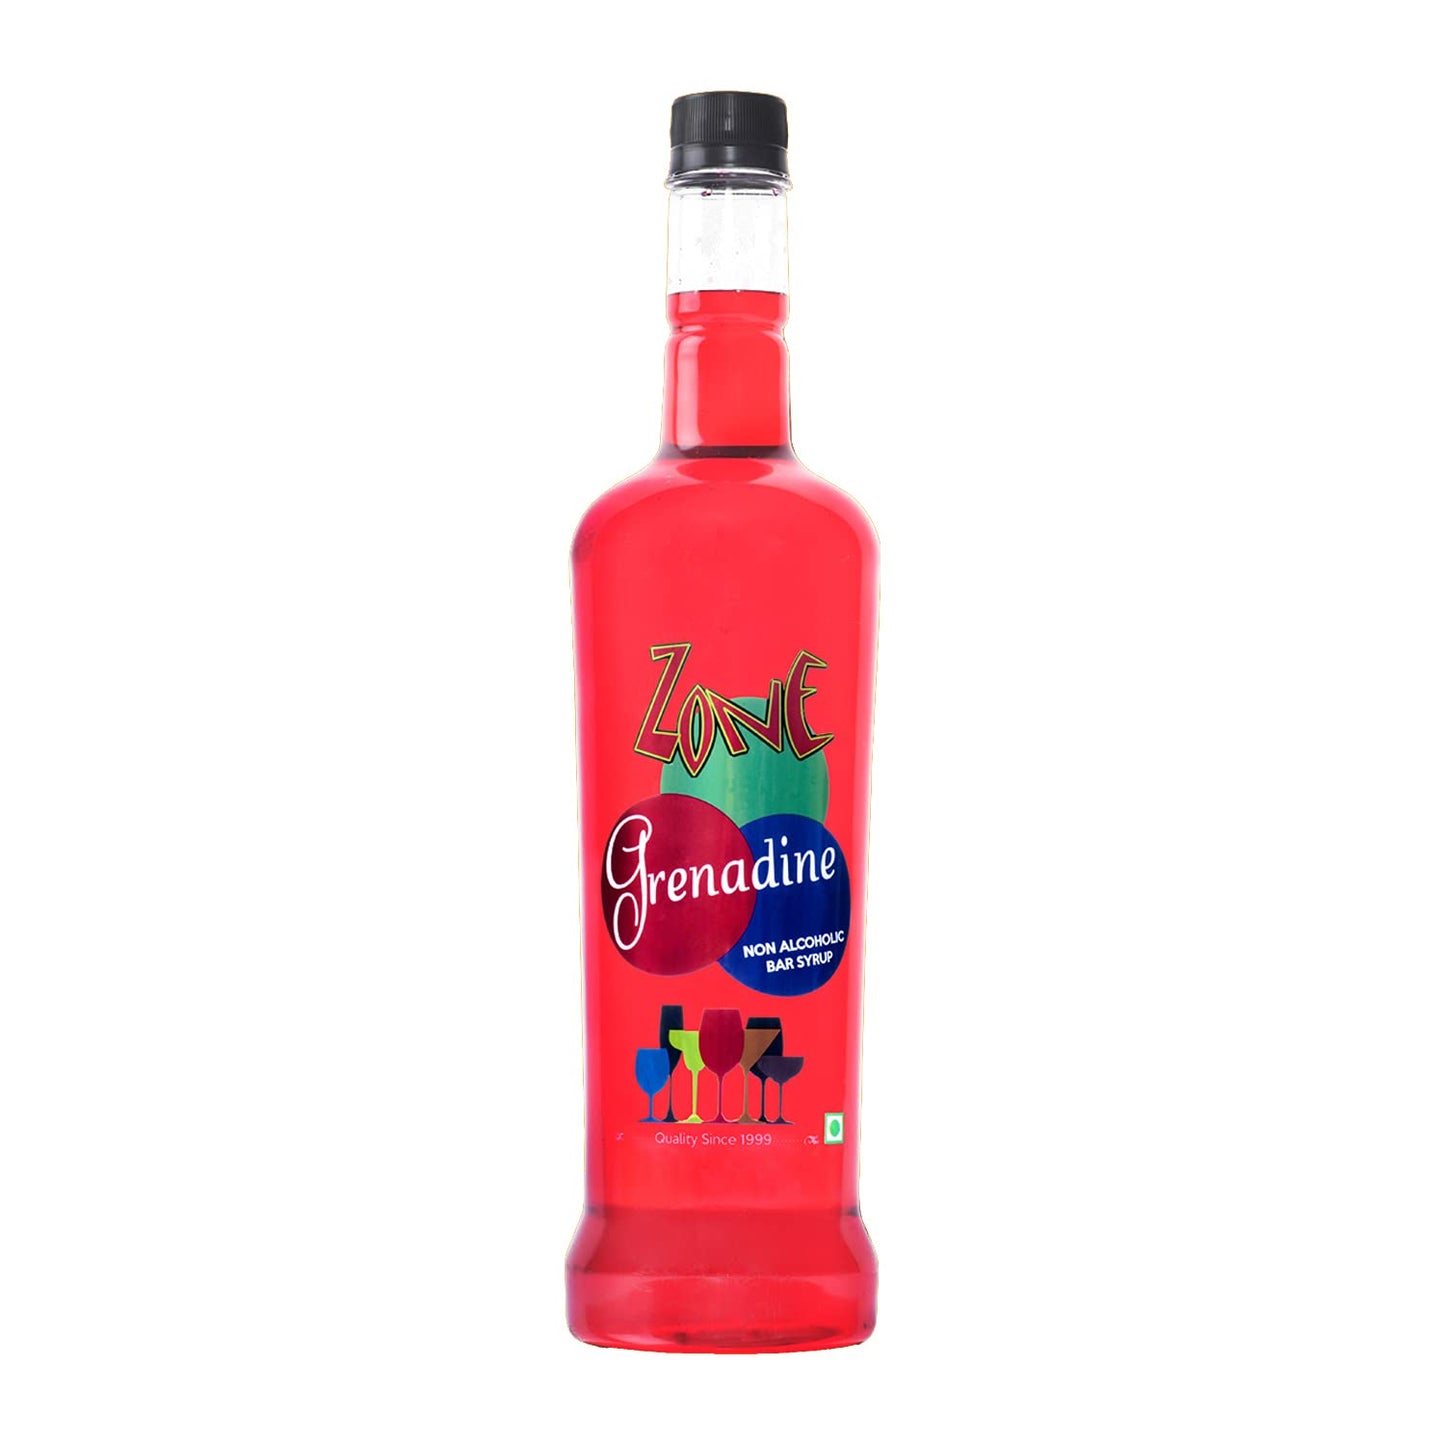 luckystore Beverages > Syrups ZONE Grenadine Flavoured Non Alcoholic Bar Syrup, 1000ml